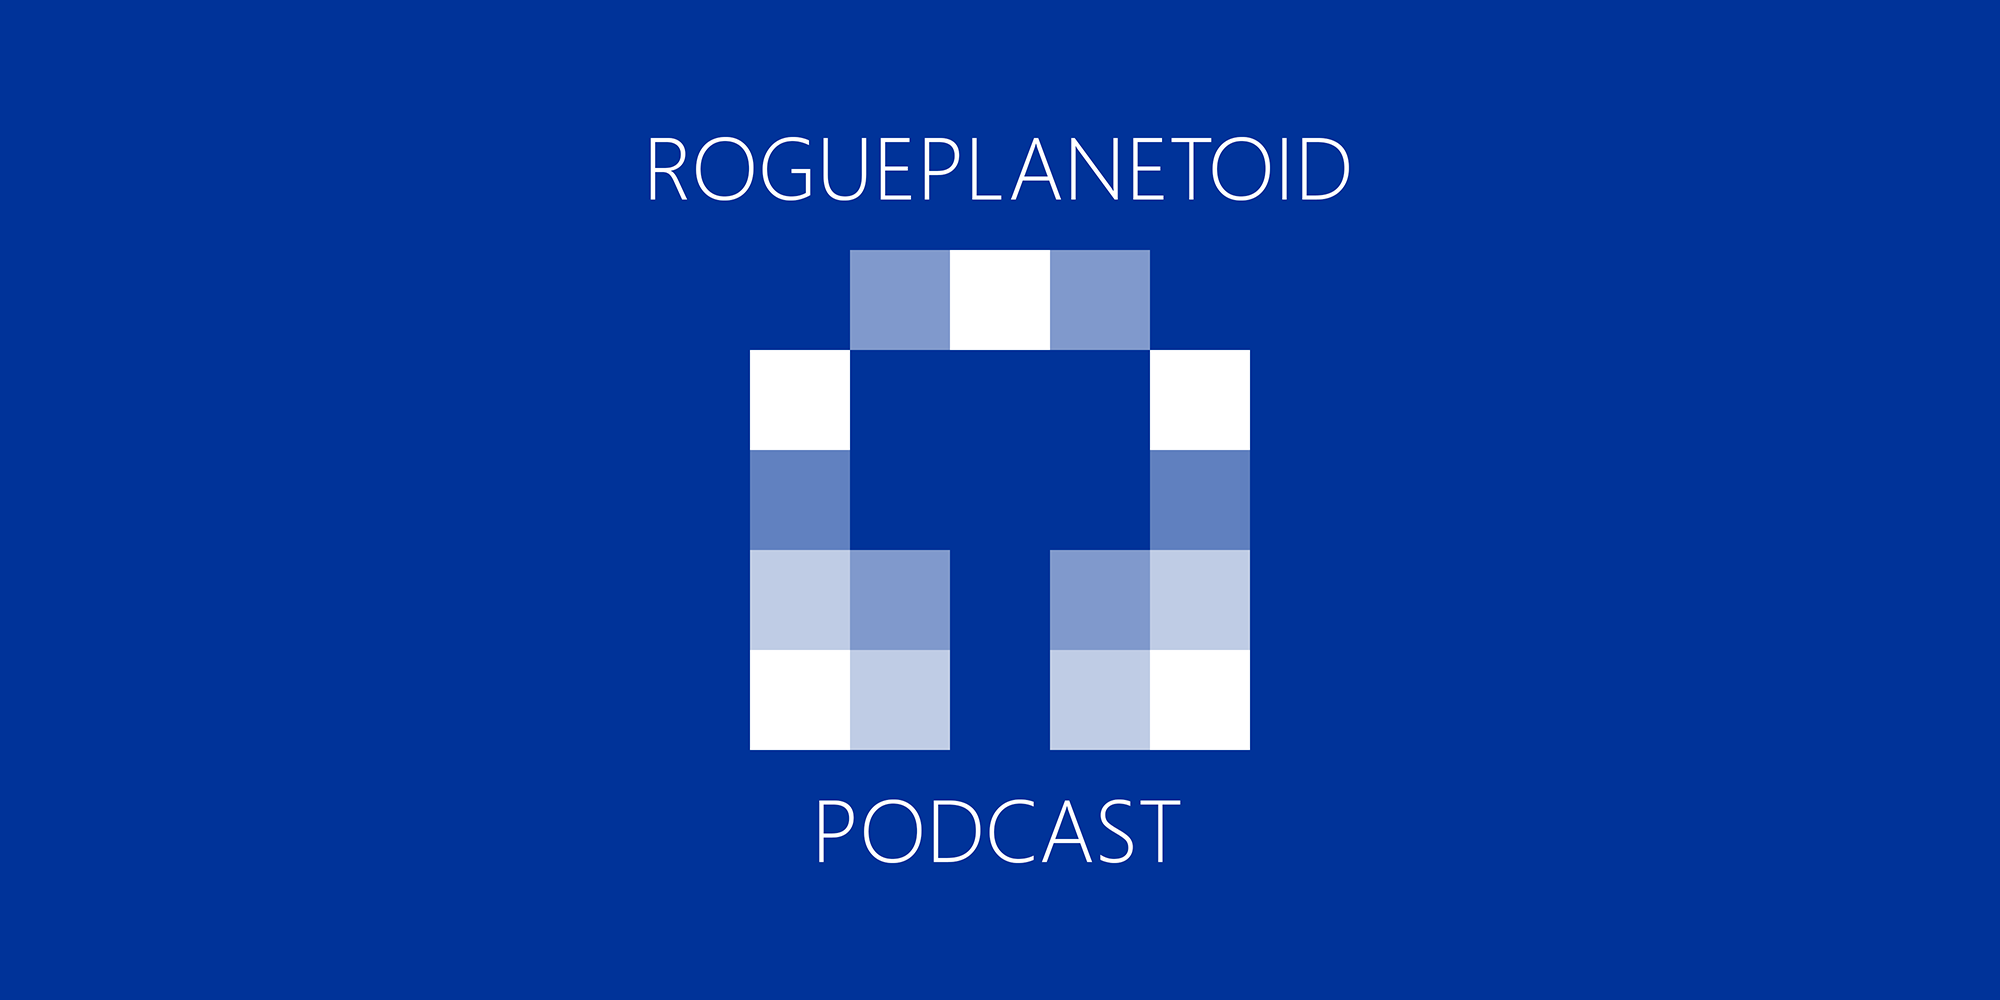 RoguePlanetoid Podcast - Episode Eleven - CESPage 25th Anniversary